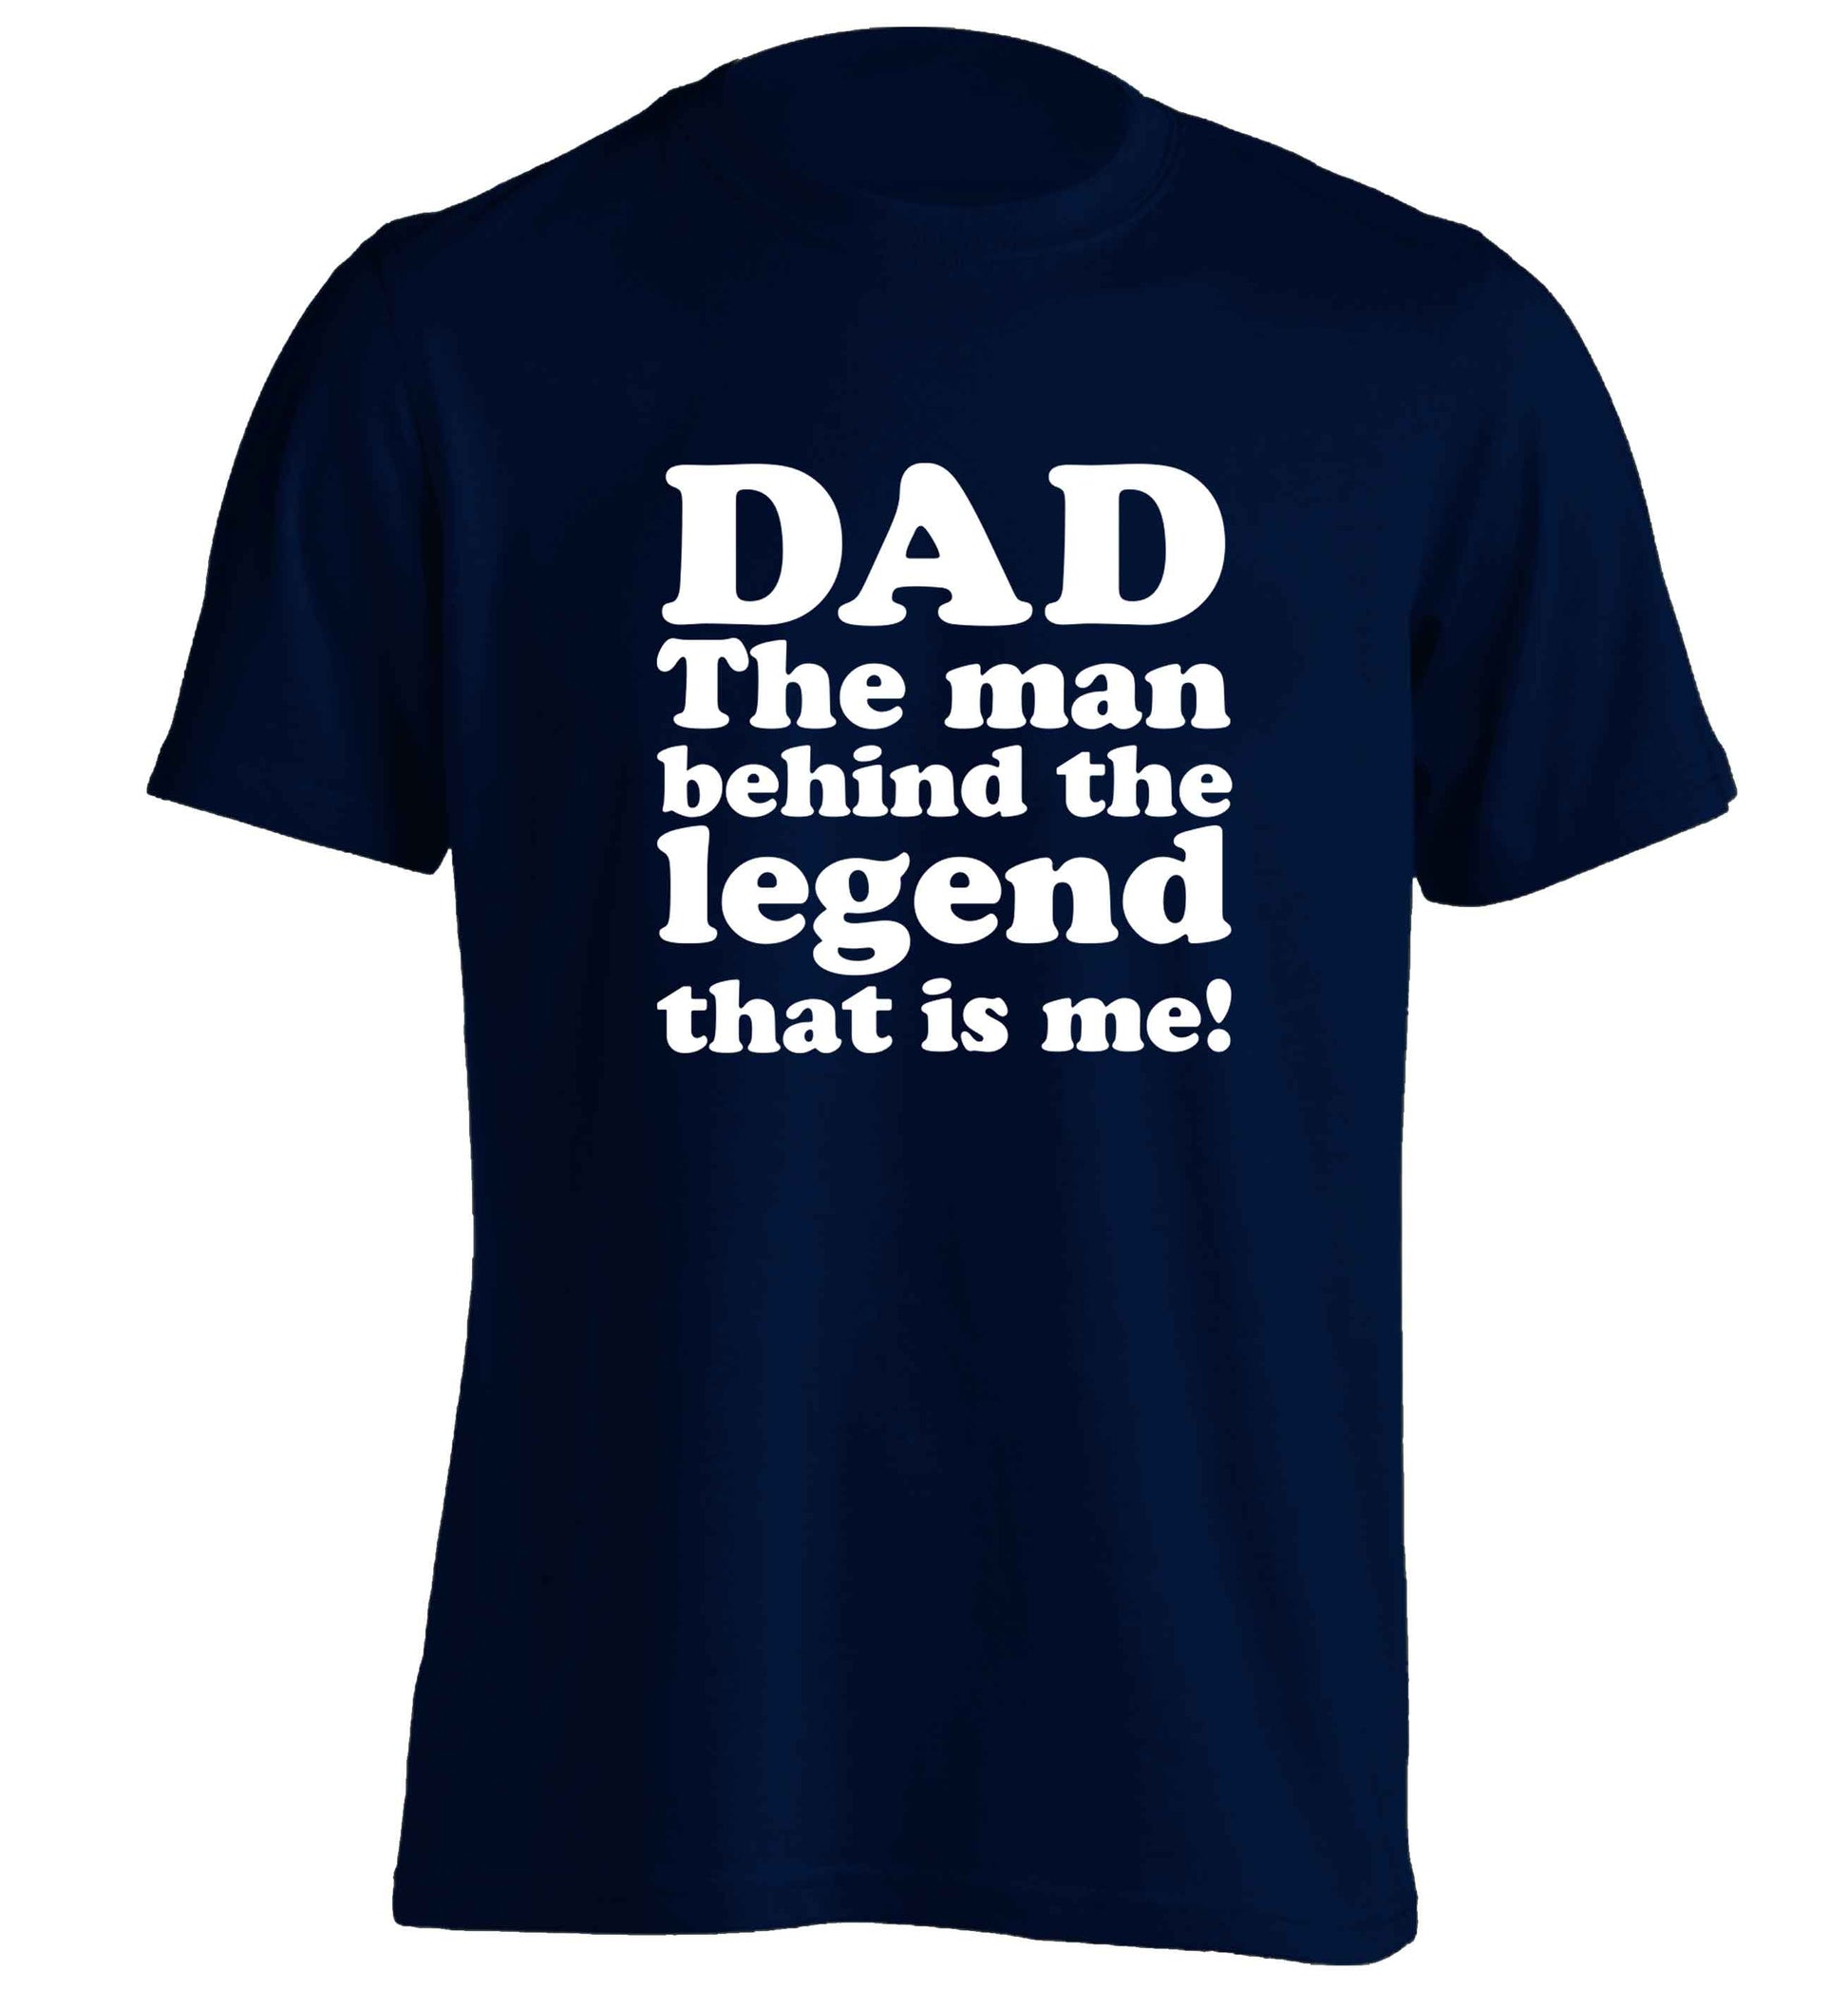 Dad the man behind the legend that is me adults unisex navy Tshirt 2XL